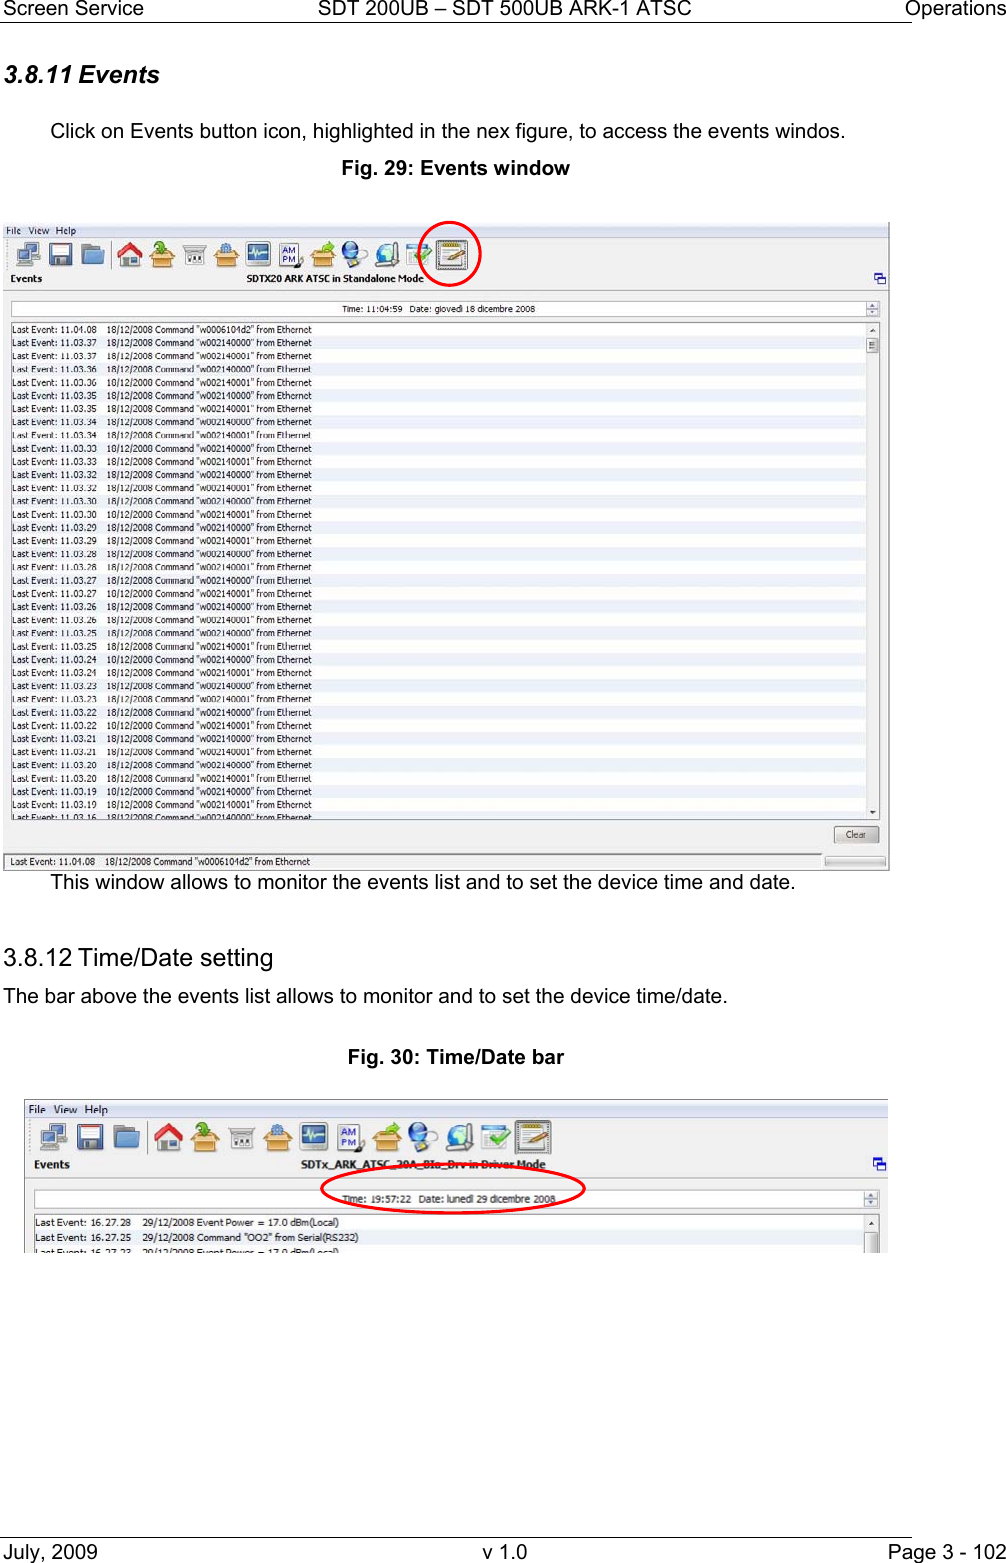 Screen Service  SDT 200UB – SDT 500UB ARK-1 ATSC  Operations July, 2009  v 1.0  Page 3 - 102 3.8.11 Events  Click on Events button icon, highlighted in the nex figure, to access the events windos. Fig. 29: Events window  This window allows to monitor the events list and to set the device time and date.  3.8.12 Time/Date setting The bar above the events list allows to monitor and to set the device time/date.  Fig. 30: Time/Date bar           